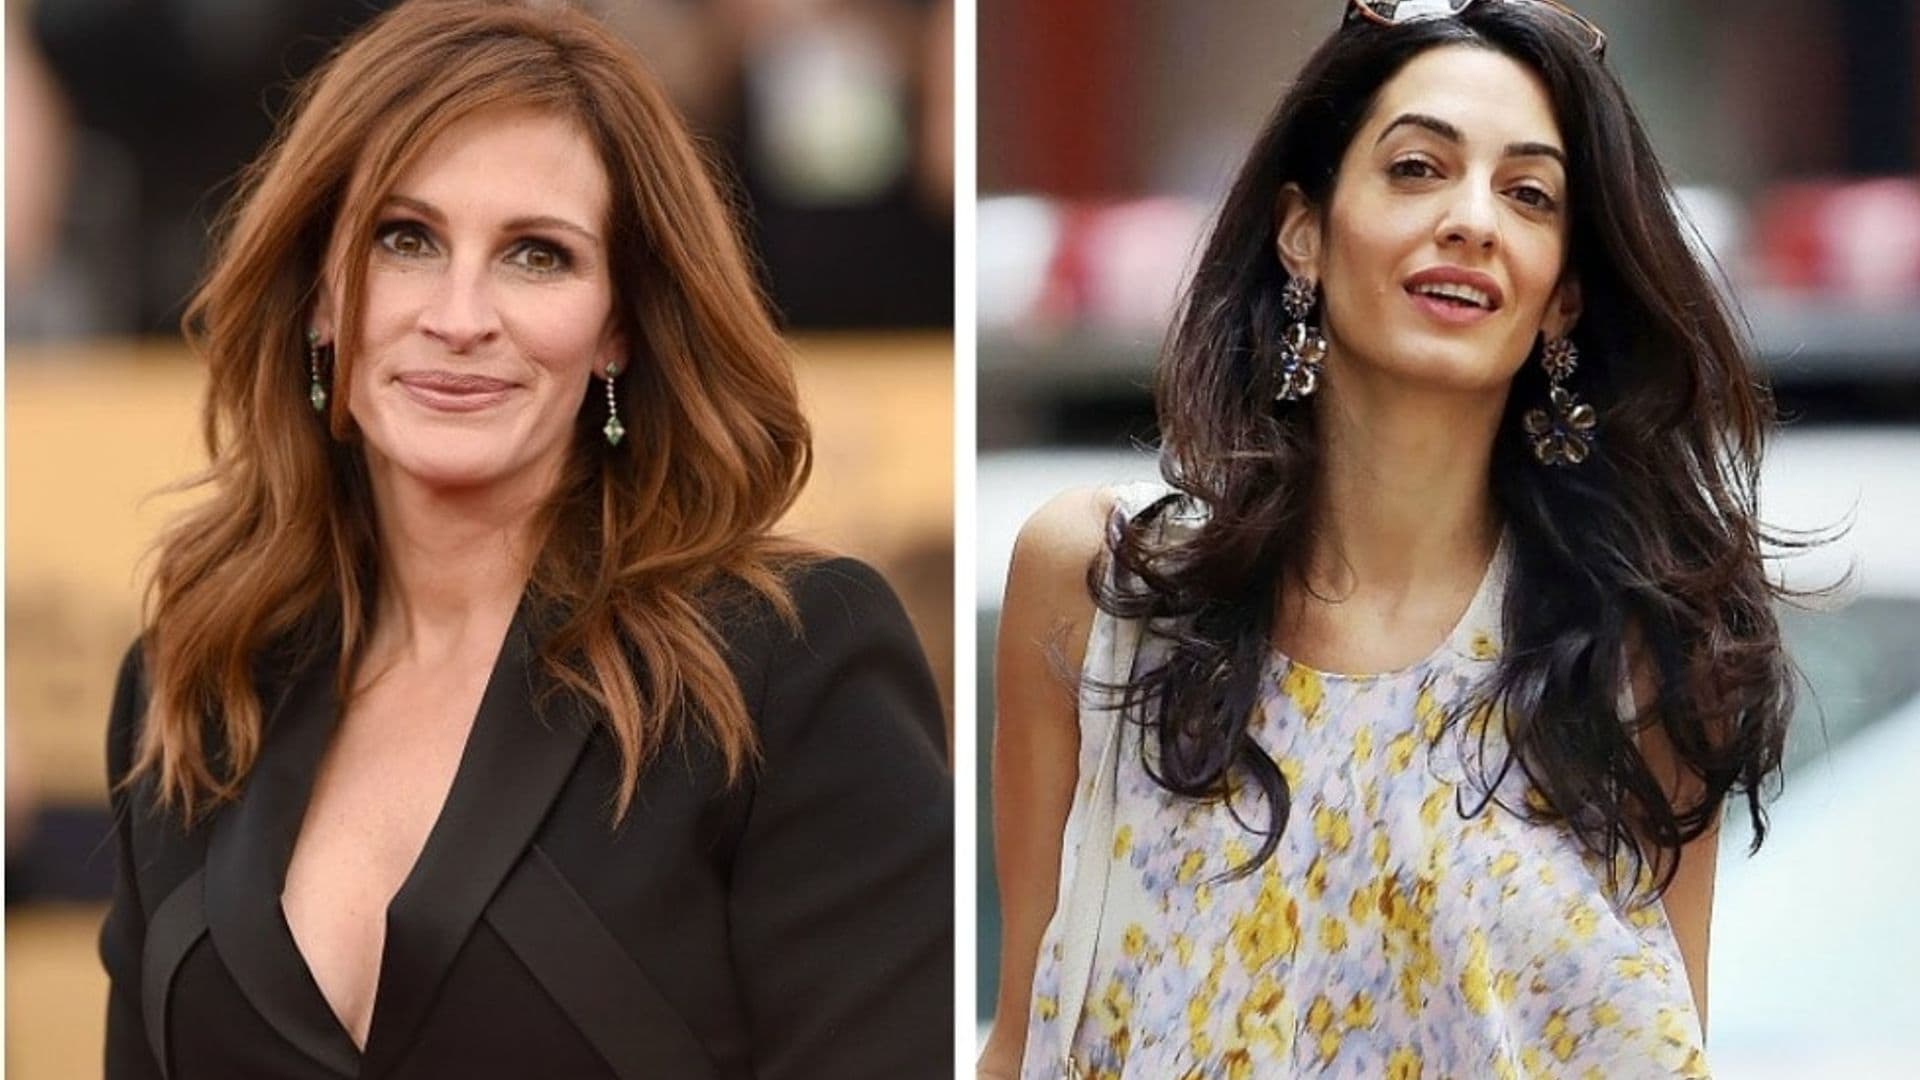 Julia Roberts raves she is 'quite enamored' with Amal Clooney